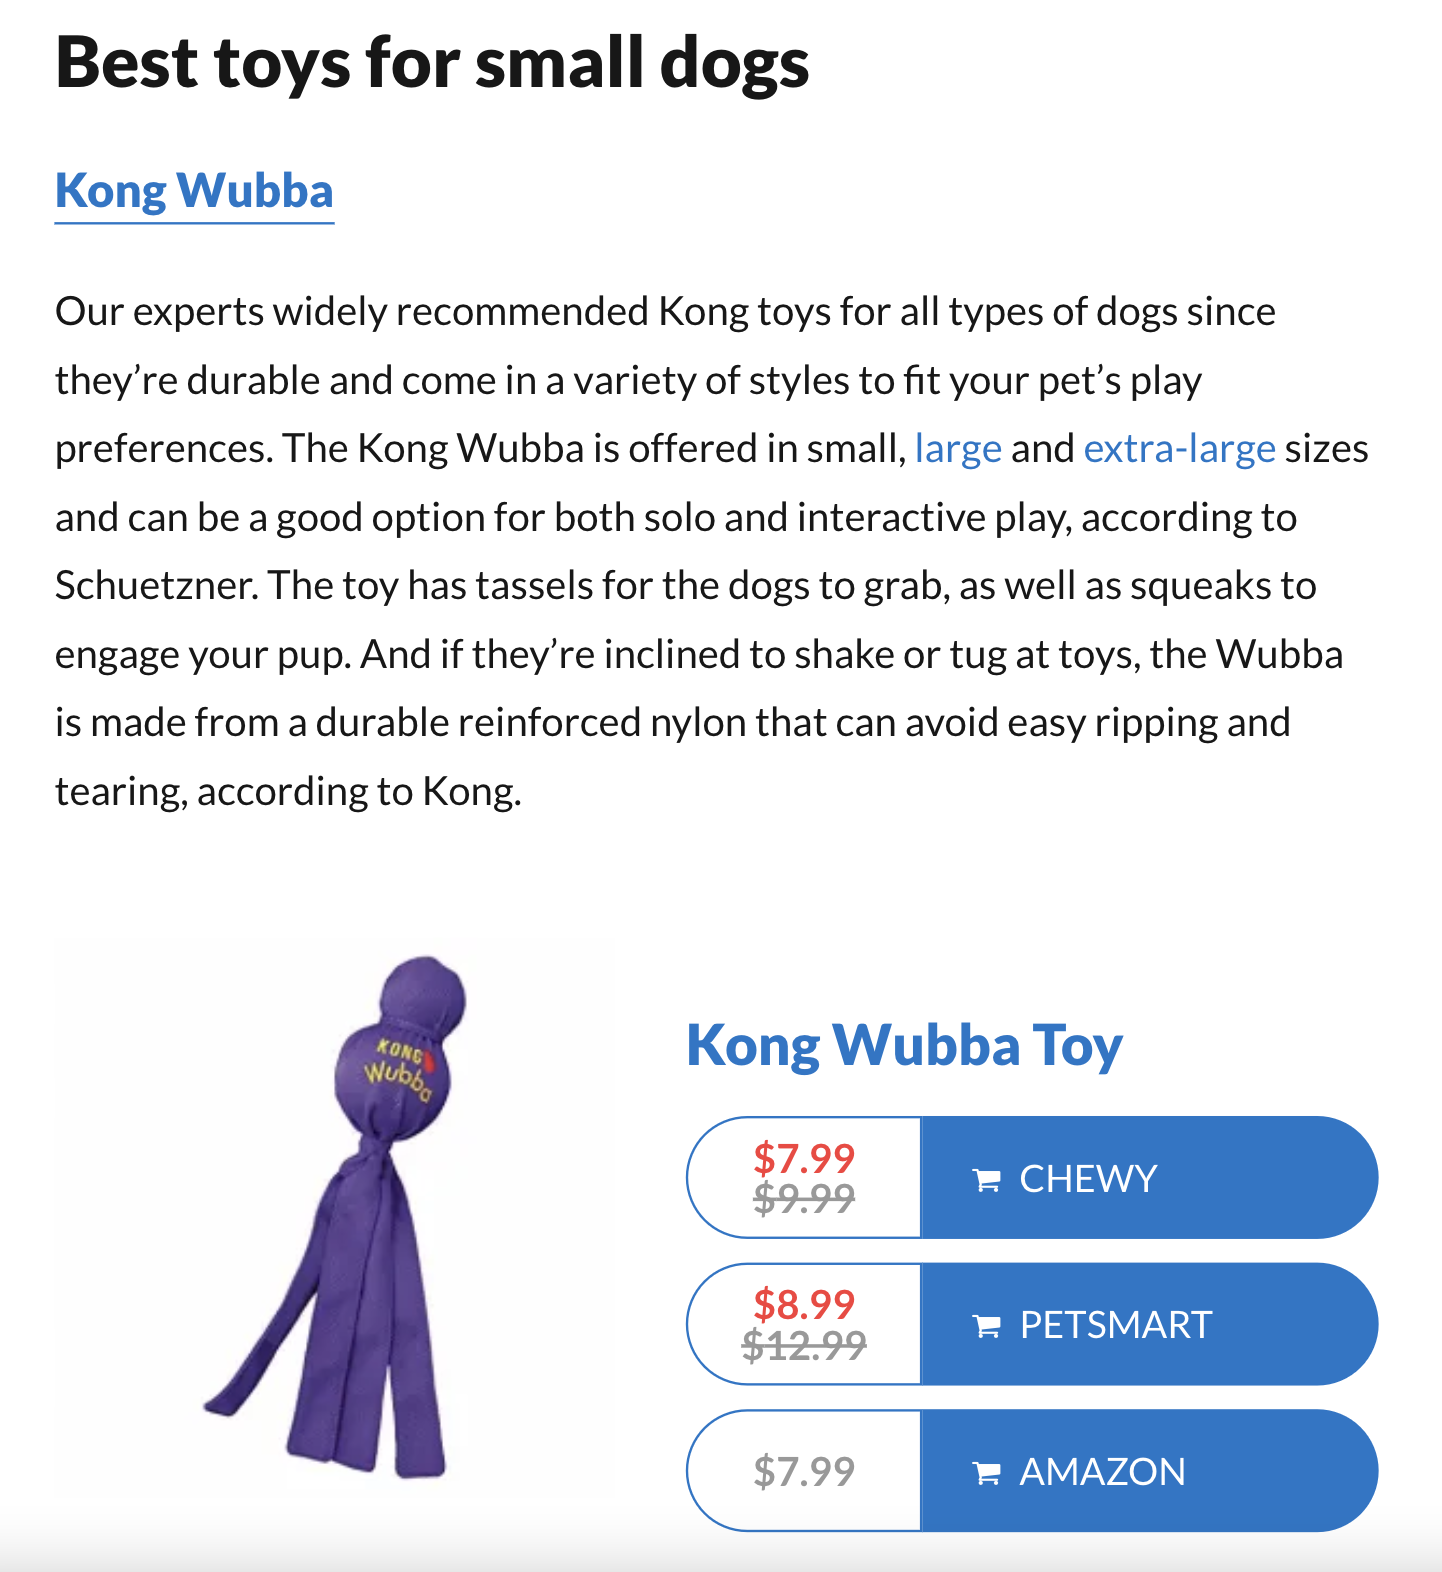 "Best toys for small dogs" section of the article